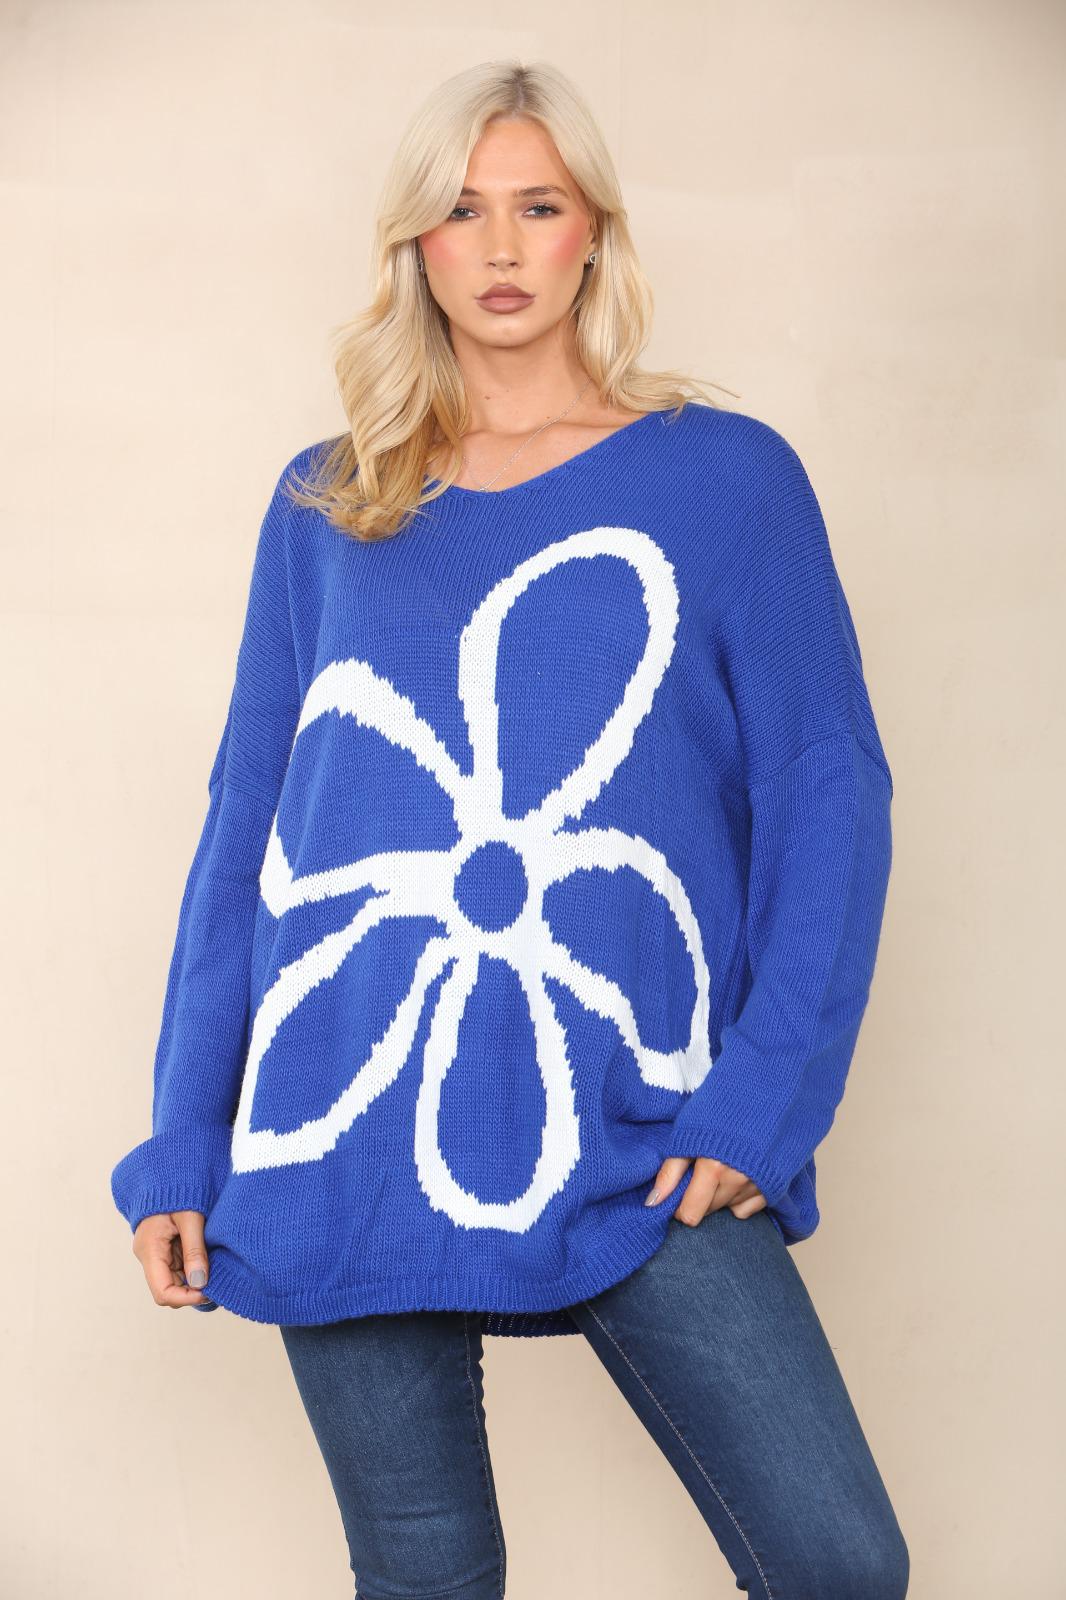 Italian Oversized Floral Print Knitted Jumper Top